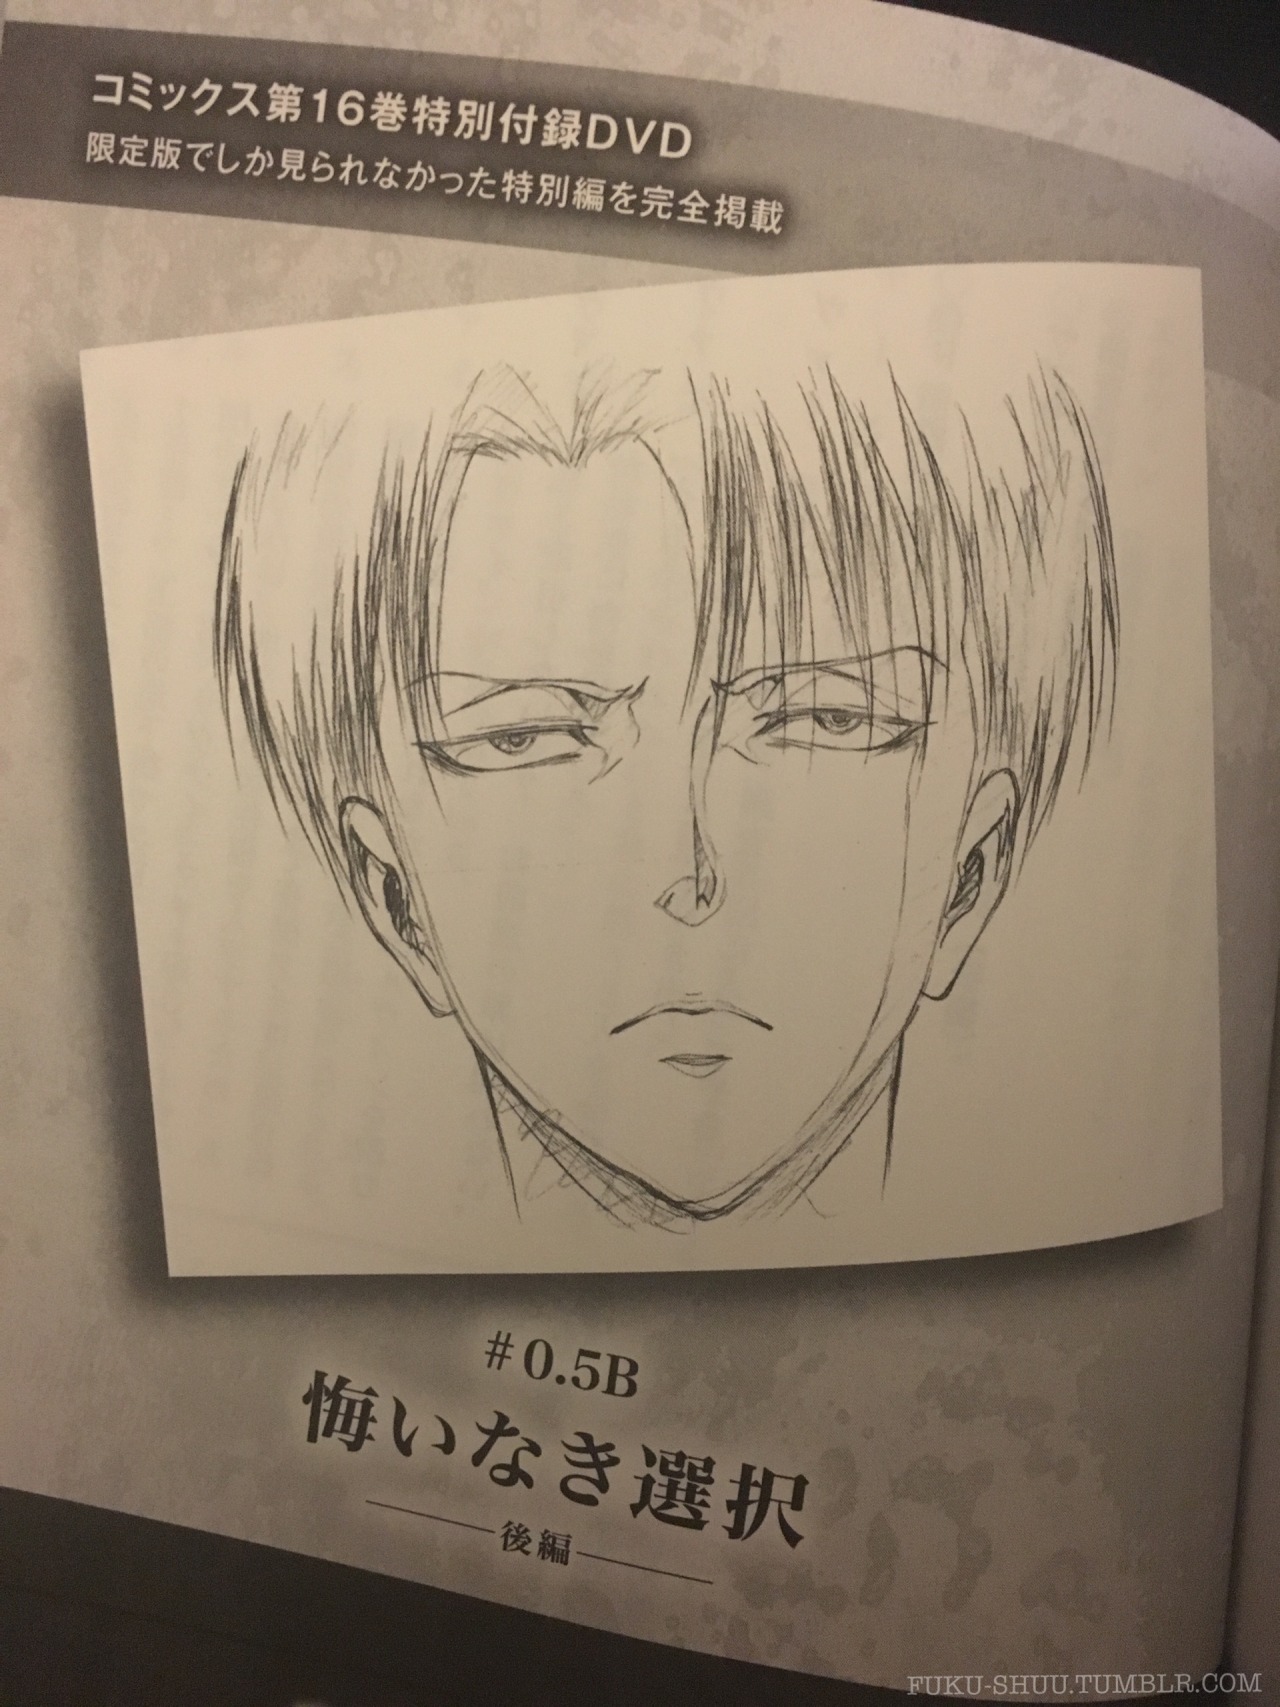 Title pages for the scripts of the A Choice with No Regrets OVAs, featuring Levi!